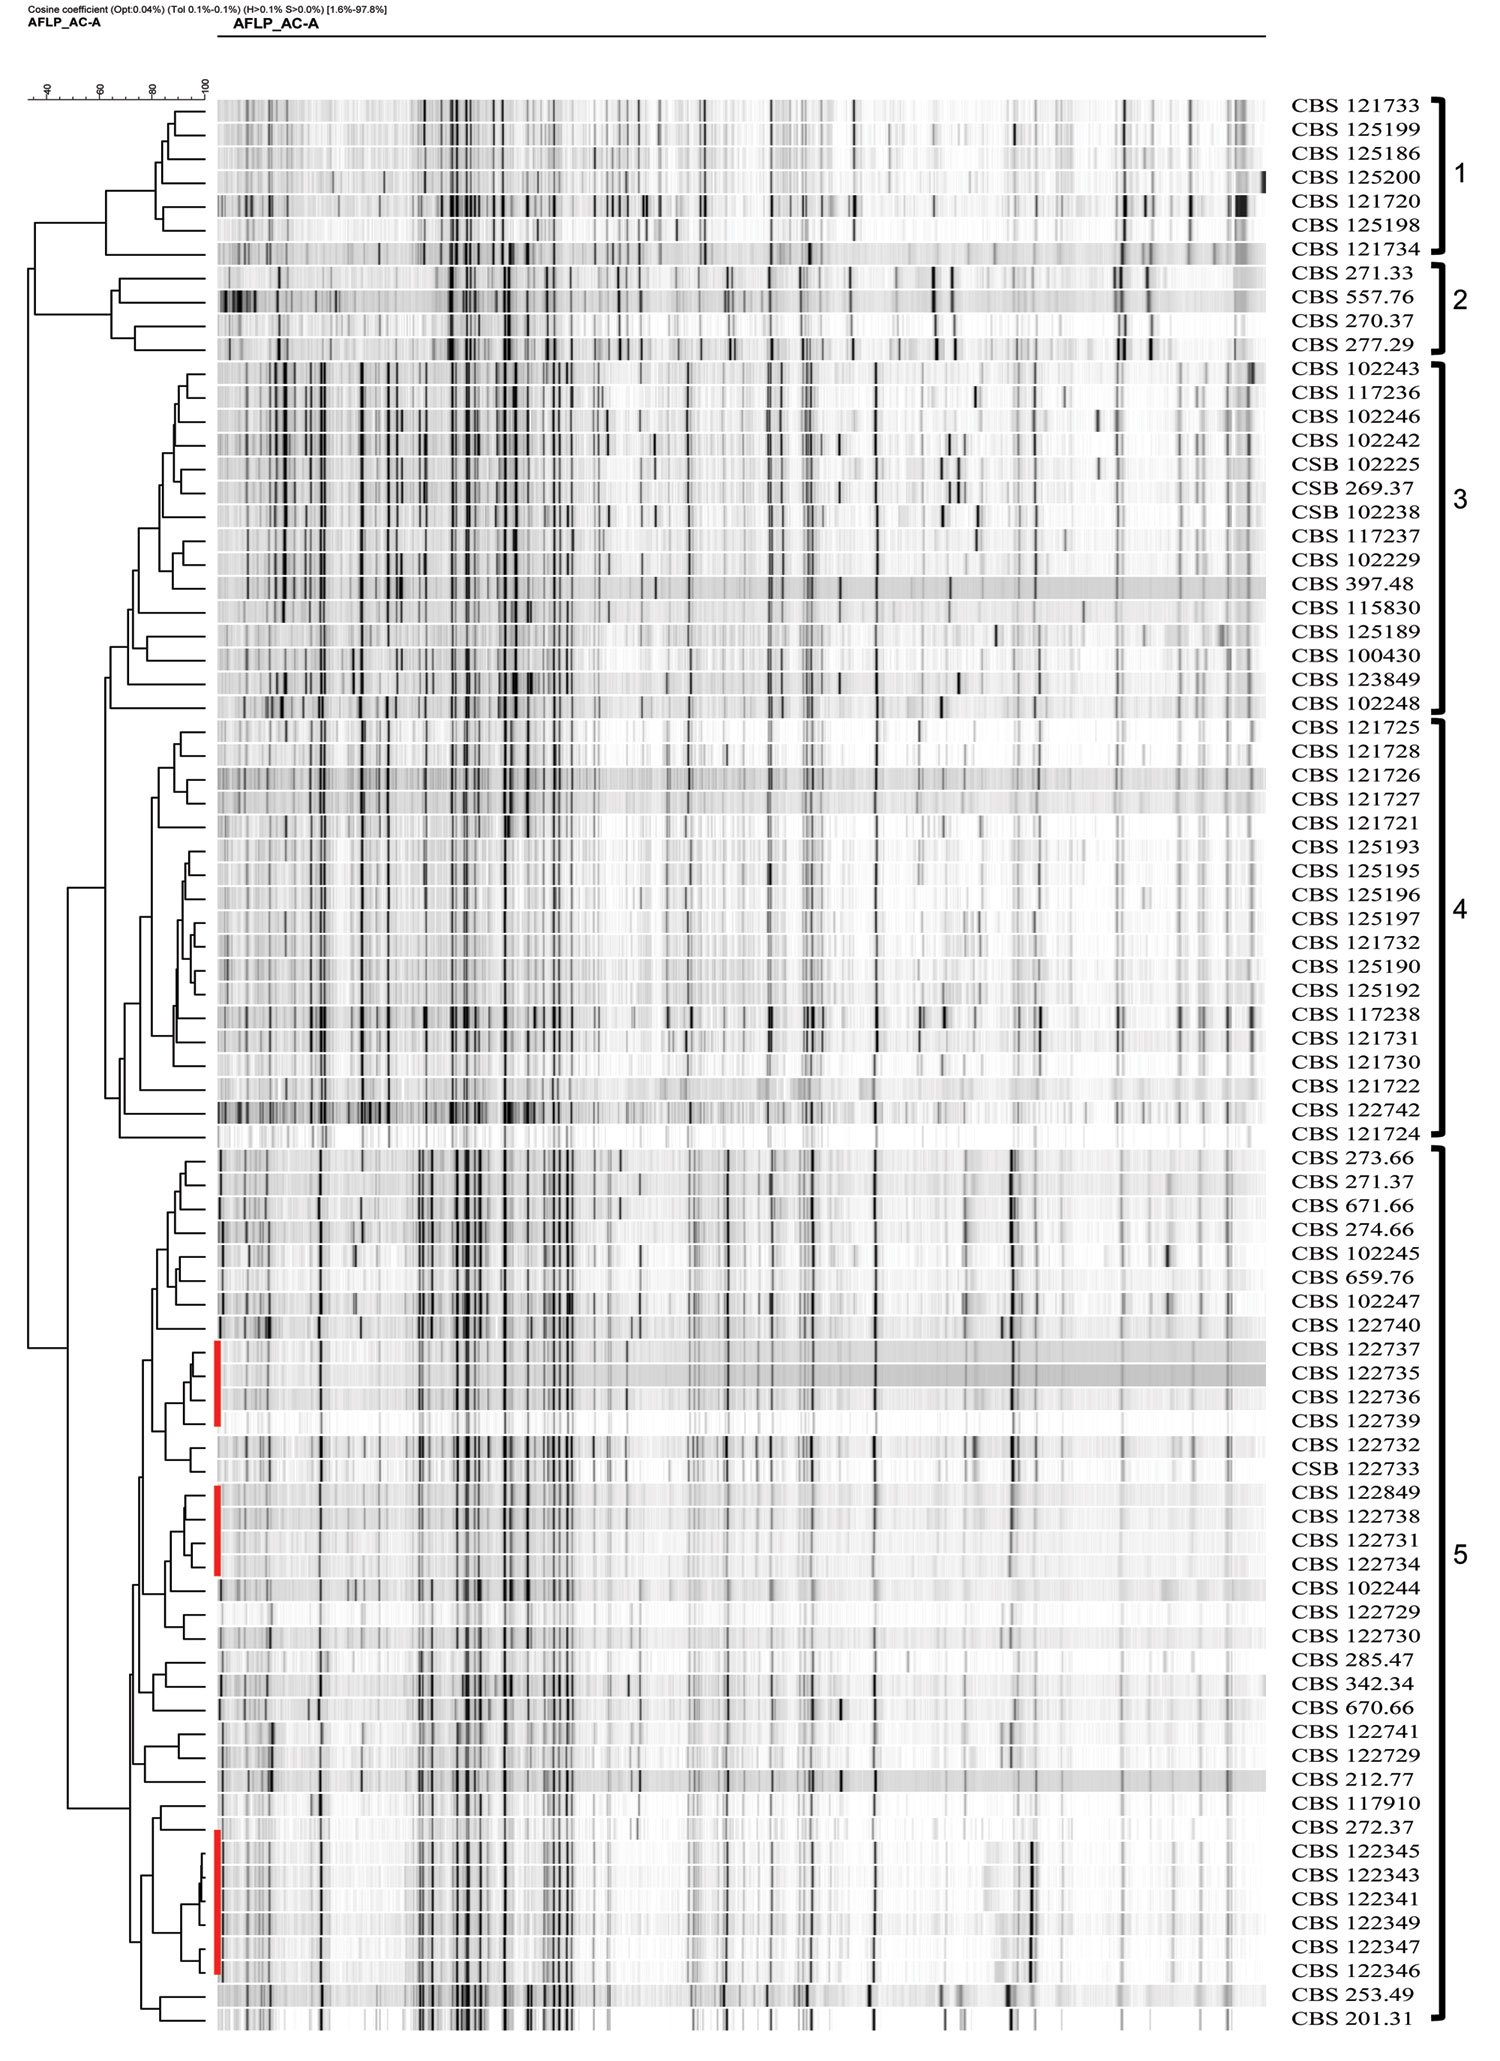 Clustering of amplified fragment-length polymorphism banding pattern of isolates of Fonsecaea spp. analyzed by using unweighted pair group method with arithmetic means. Red bars indicate clonal dispersal. Clusters 1 and 2 are F. nubica, clusters 3 and 4 are F. monophora, and cluster 5 is F. pedrosoi.